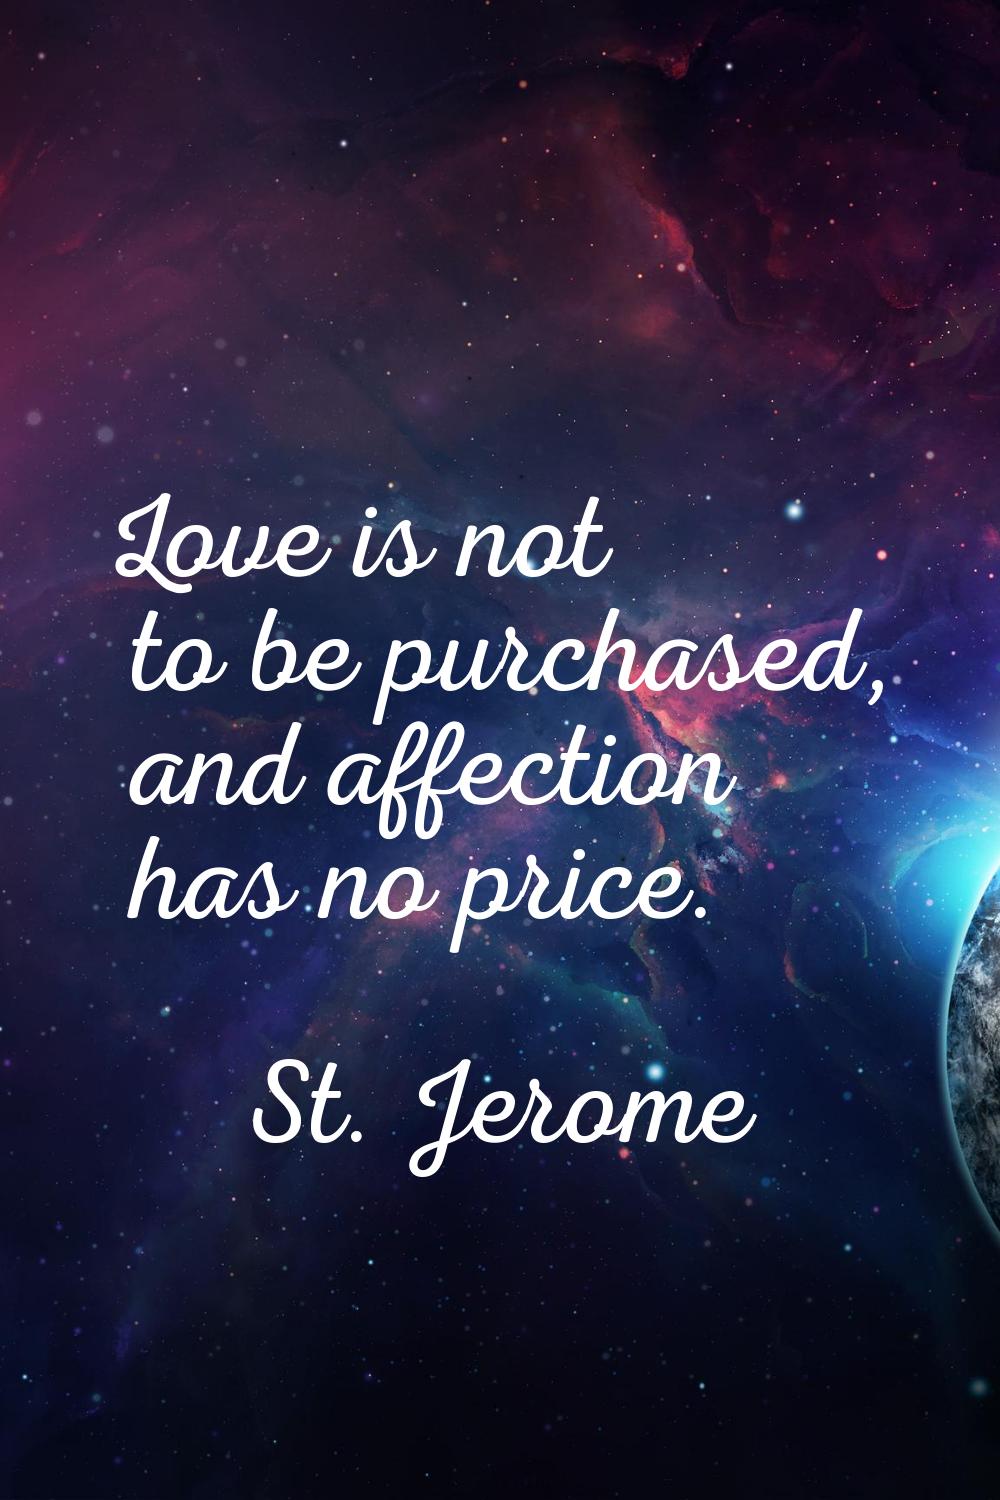 Love is not to be purchased, and affection has no price.